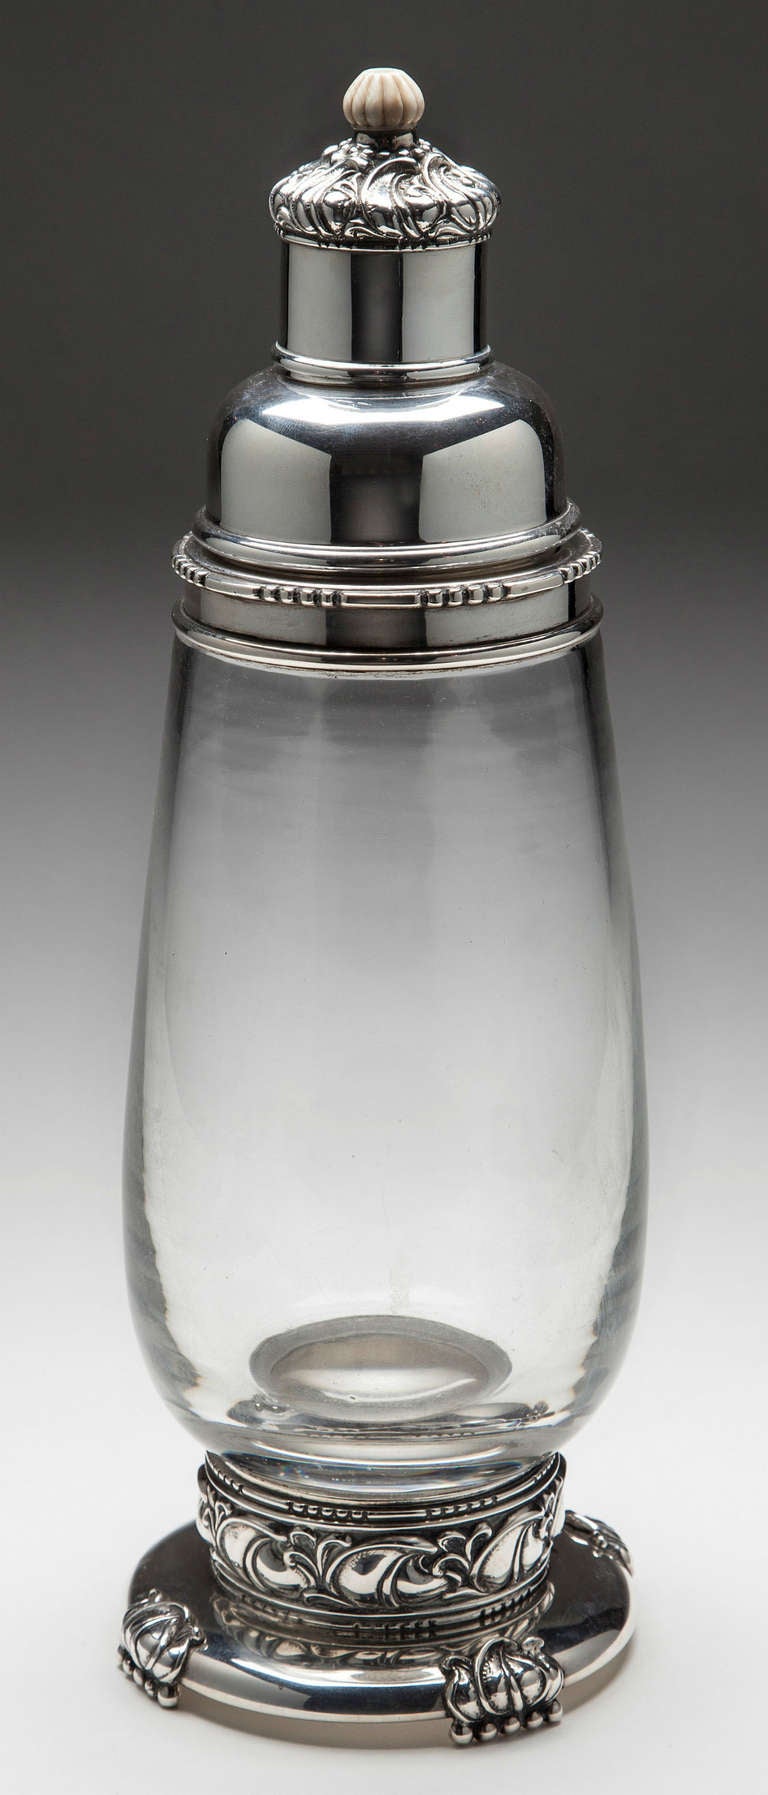 Large Art Deco style sterling and glass cocktail shaker made by Quaker Silver Company, Attleboro Massachusetts, 1926-59 when it was bought by Gorham. This large shaker is 13.5 inches high.